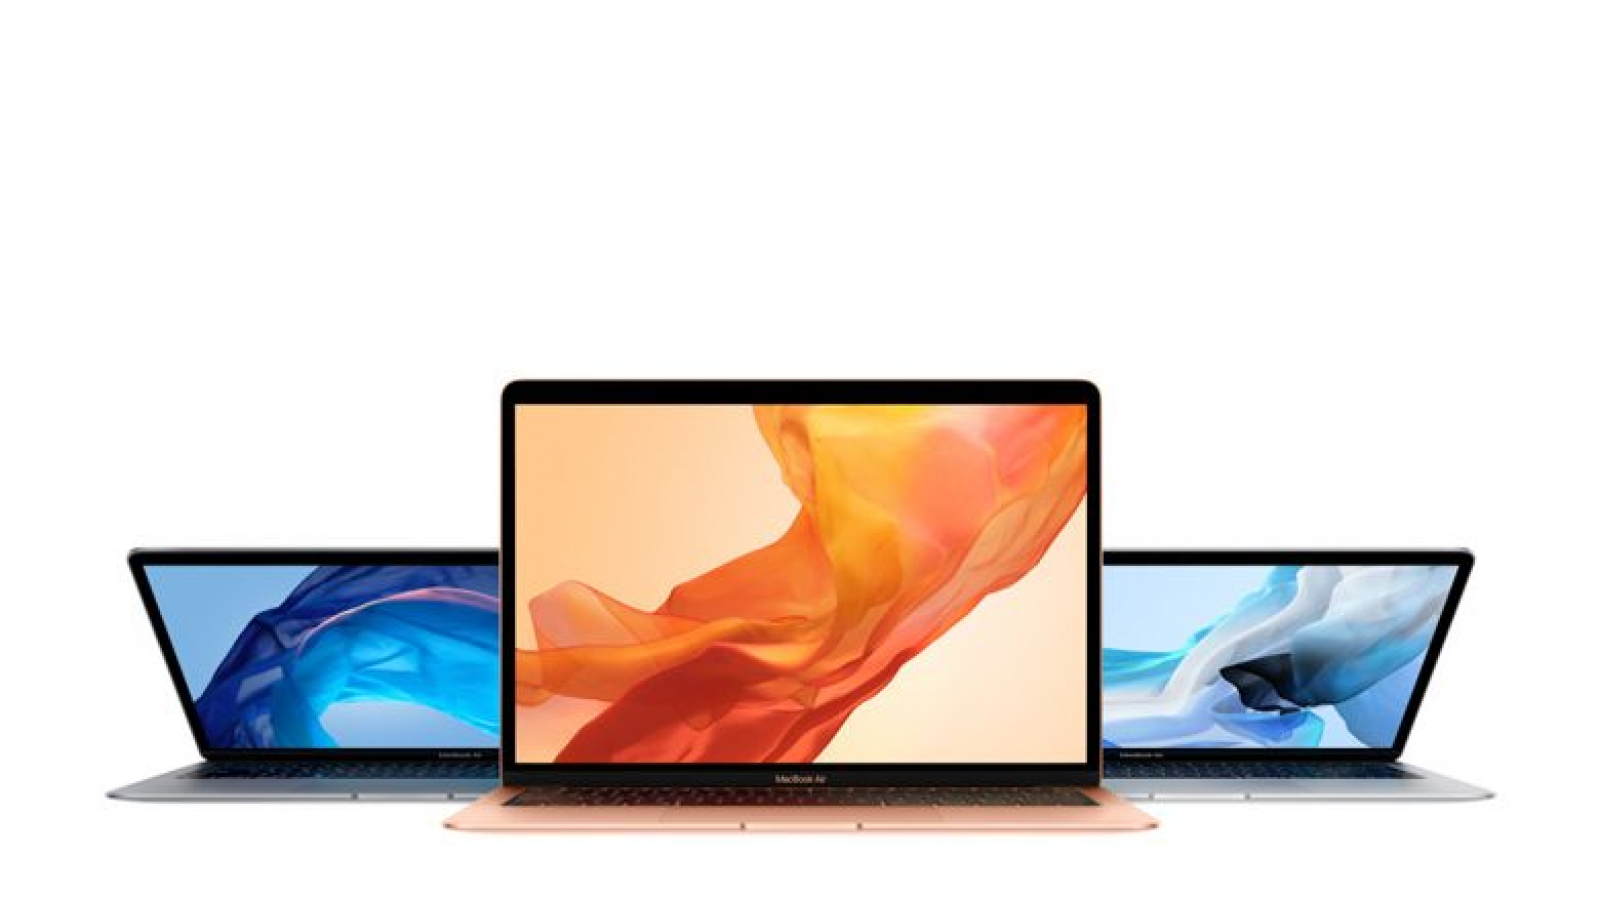 macbook-air-2018-review-featured-compressed